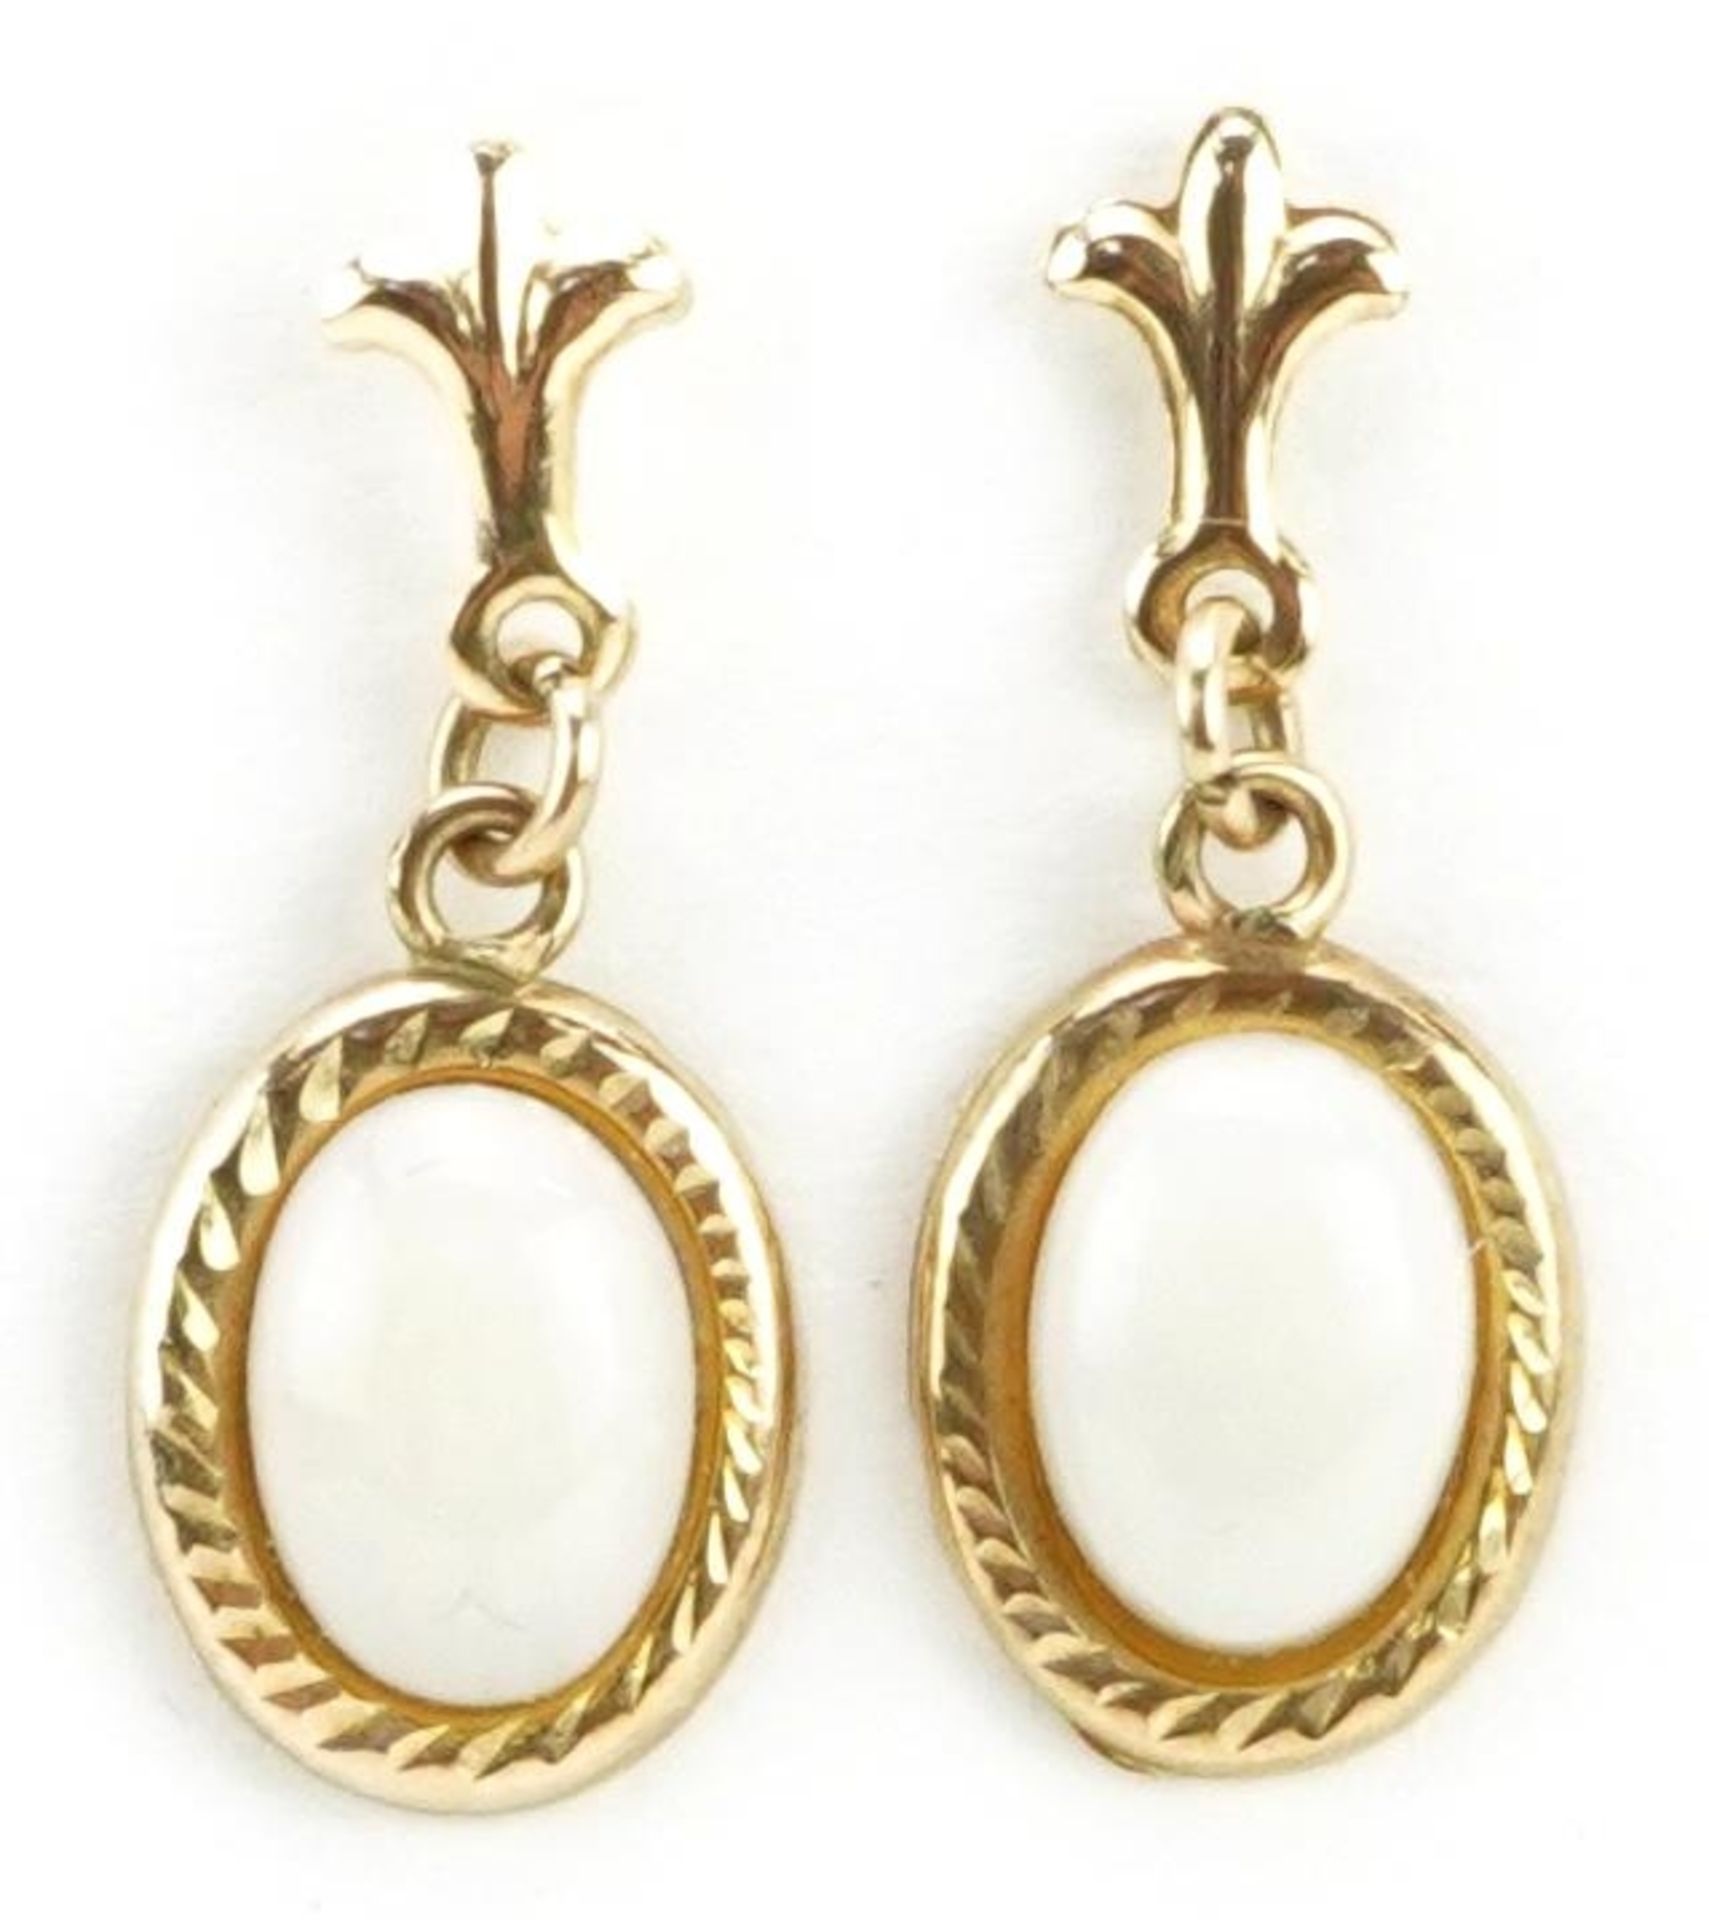 Pair of 9ct gold cabochon opal drop earrings, 1.9cm high, 0.7g